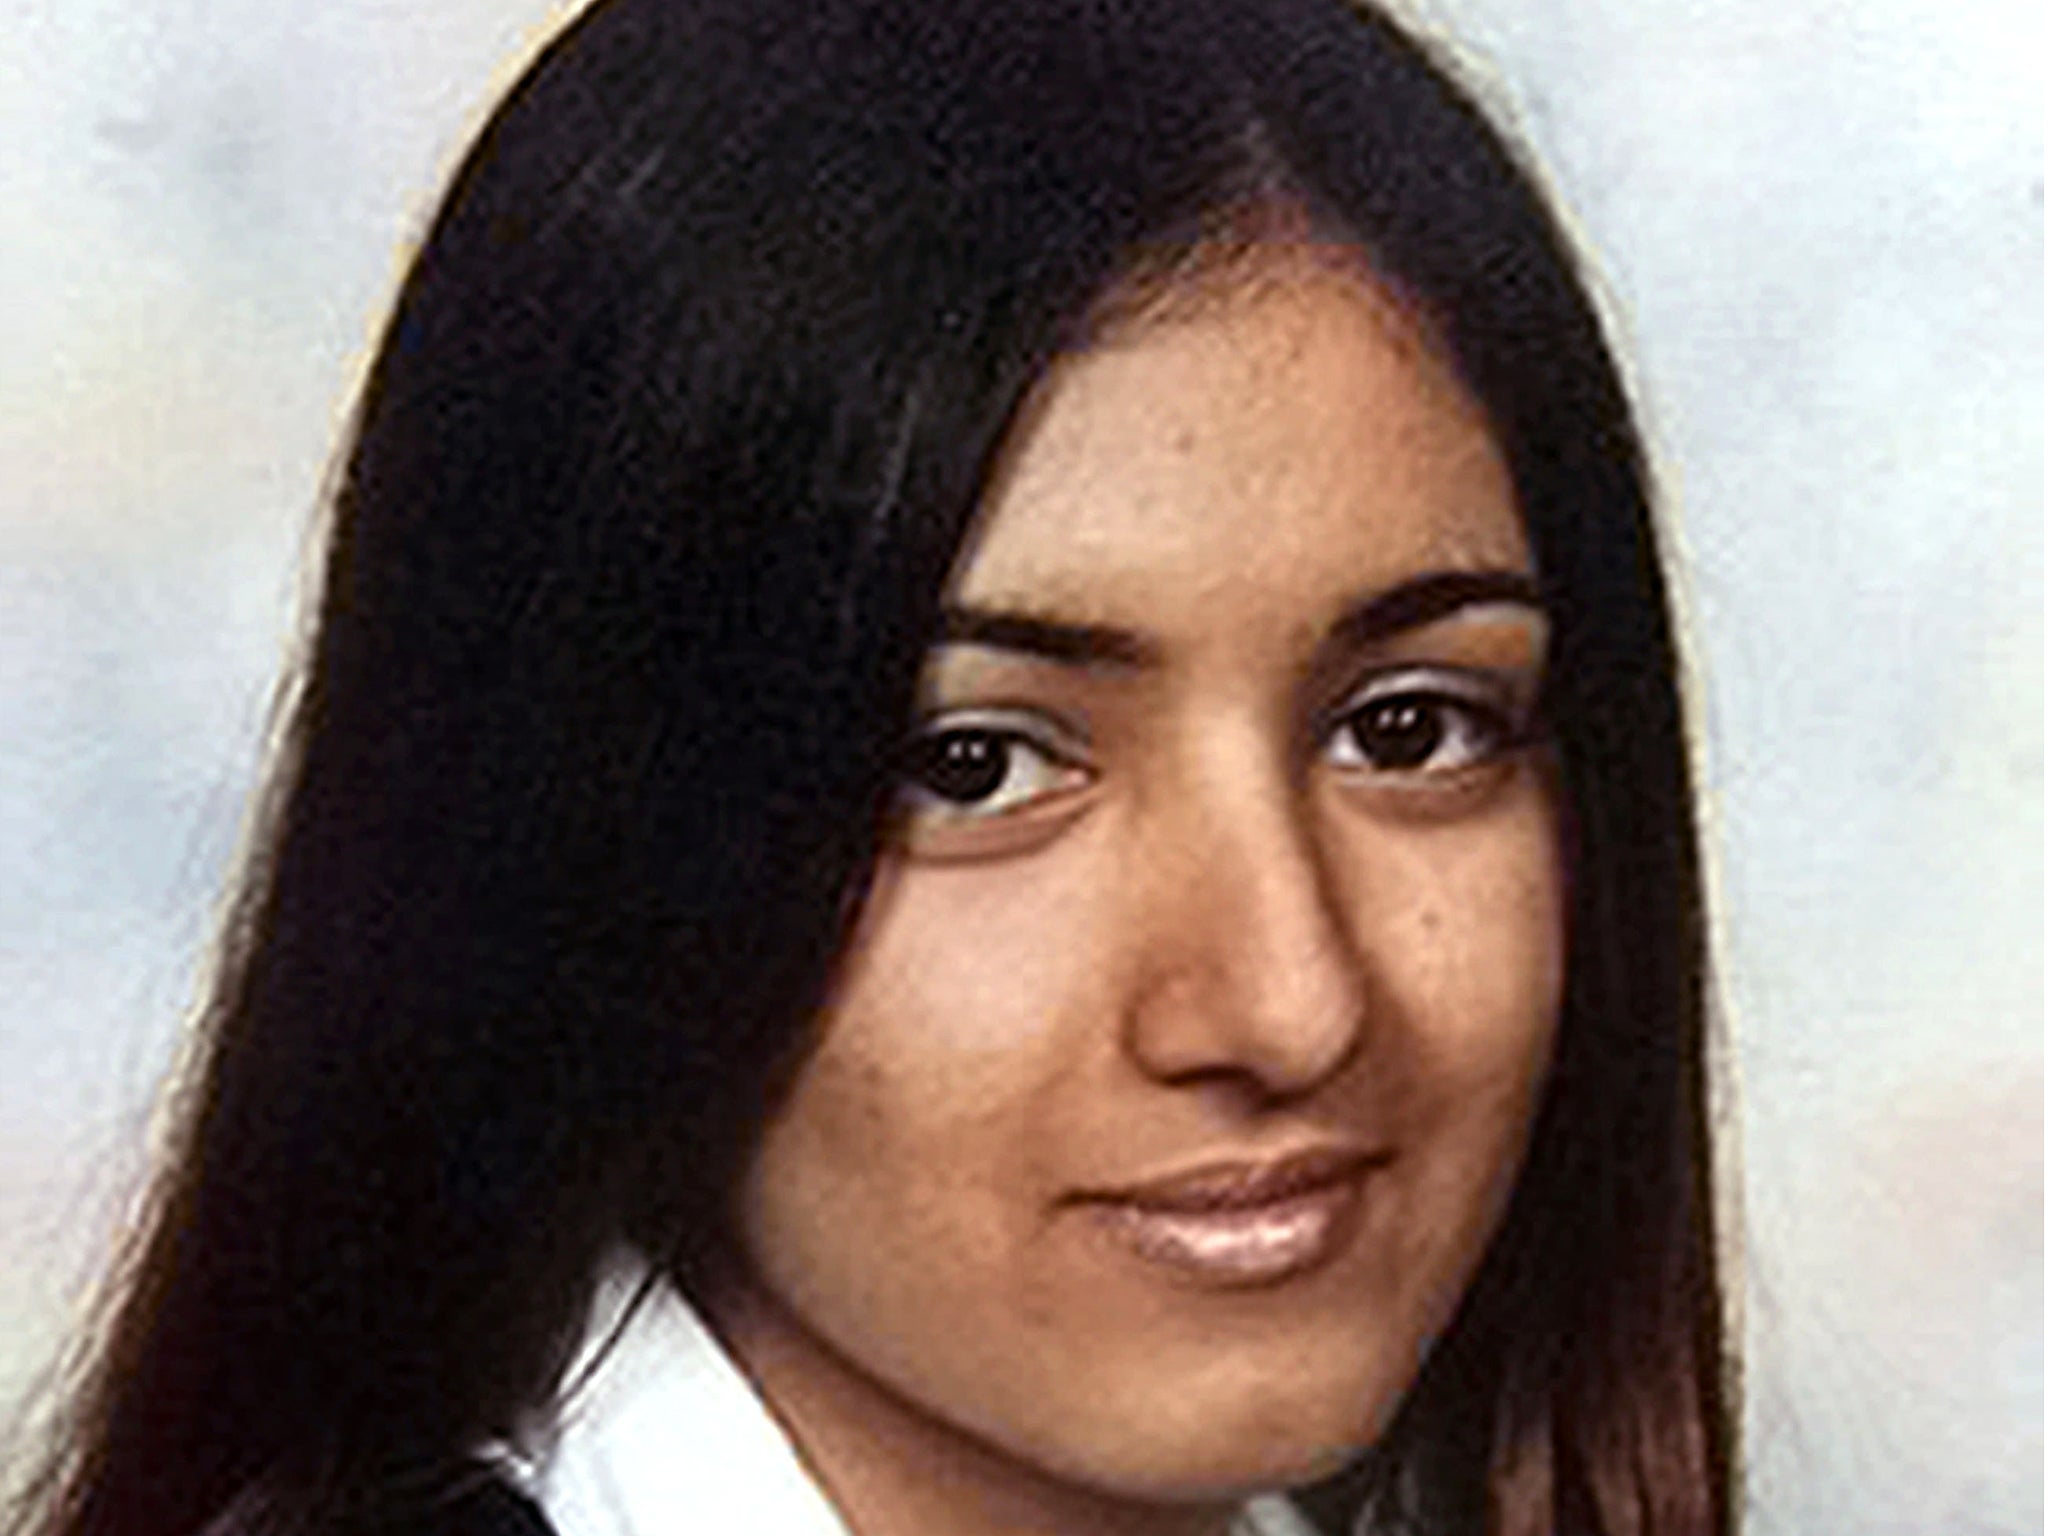 Shafilia Ahmed was murdered by her family in 2003 in a so-called honour killing